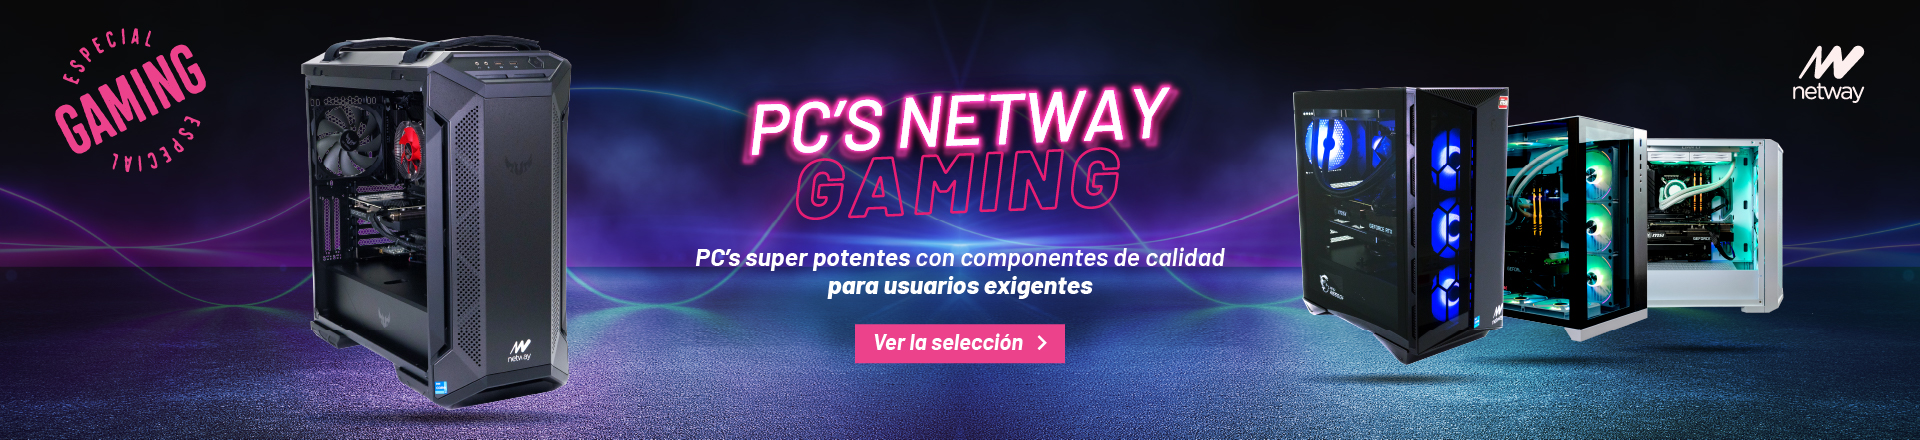 PC's Netway Gaming